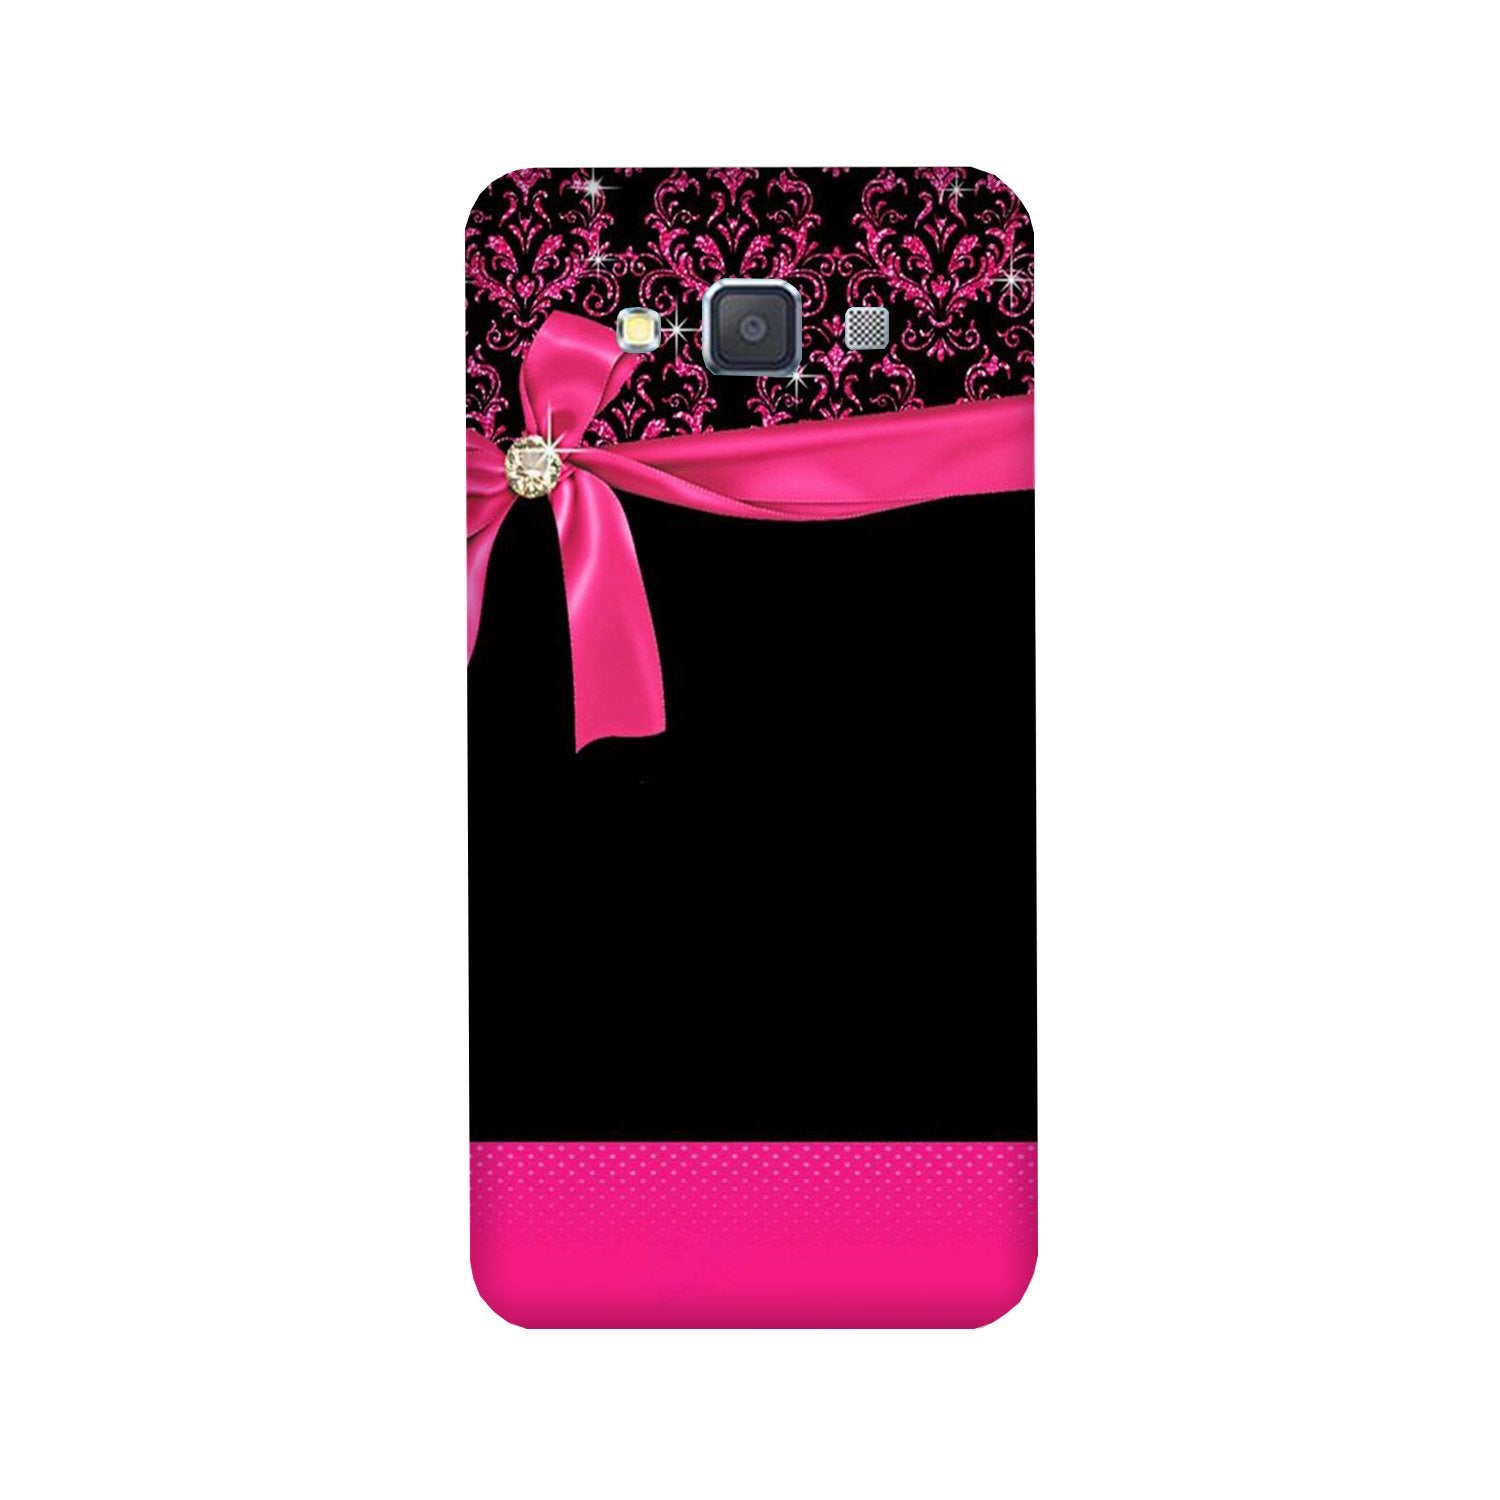 Gift Wrap4 Case for Galaxy A5 (2015)